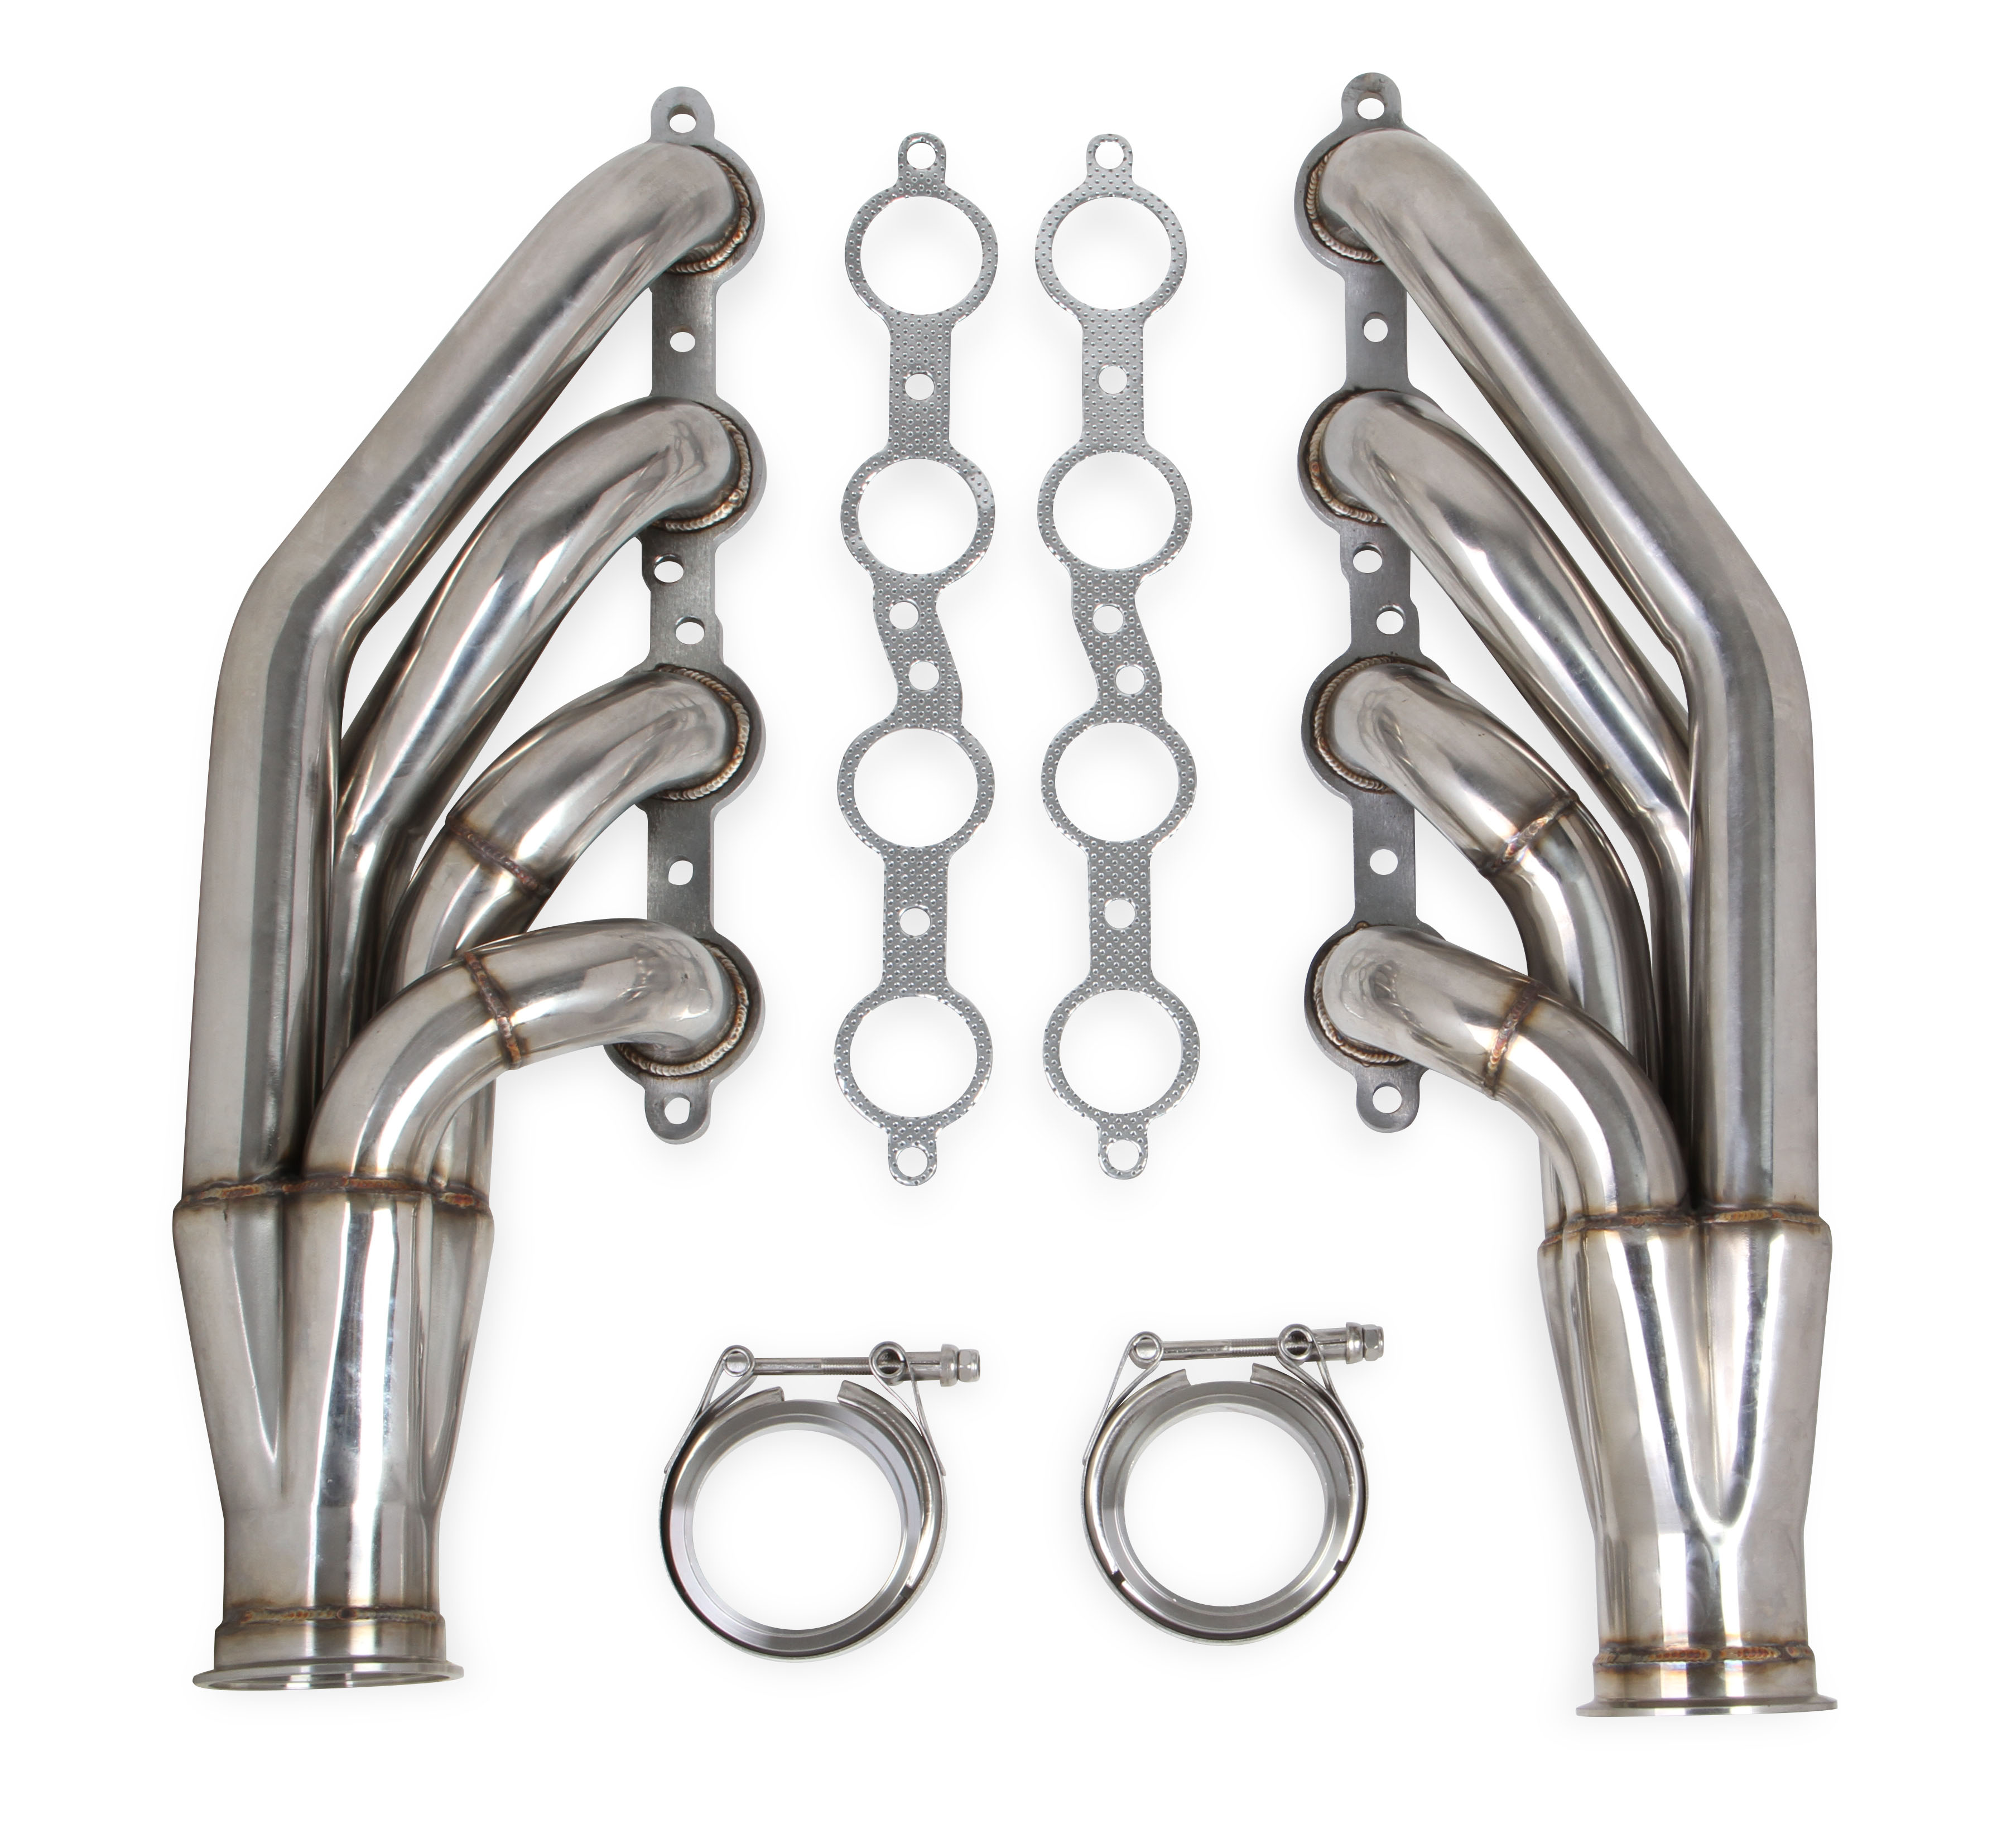 Flowtech LS 4.8L/5.3L/6.0L V8 1 7/8" 304 Stainless Turbo Headers - Polished Finish